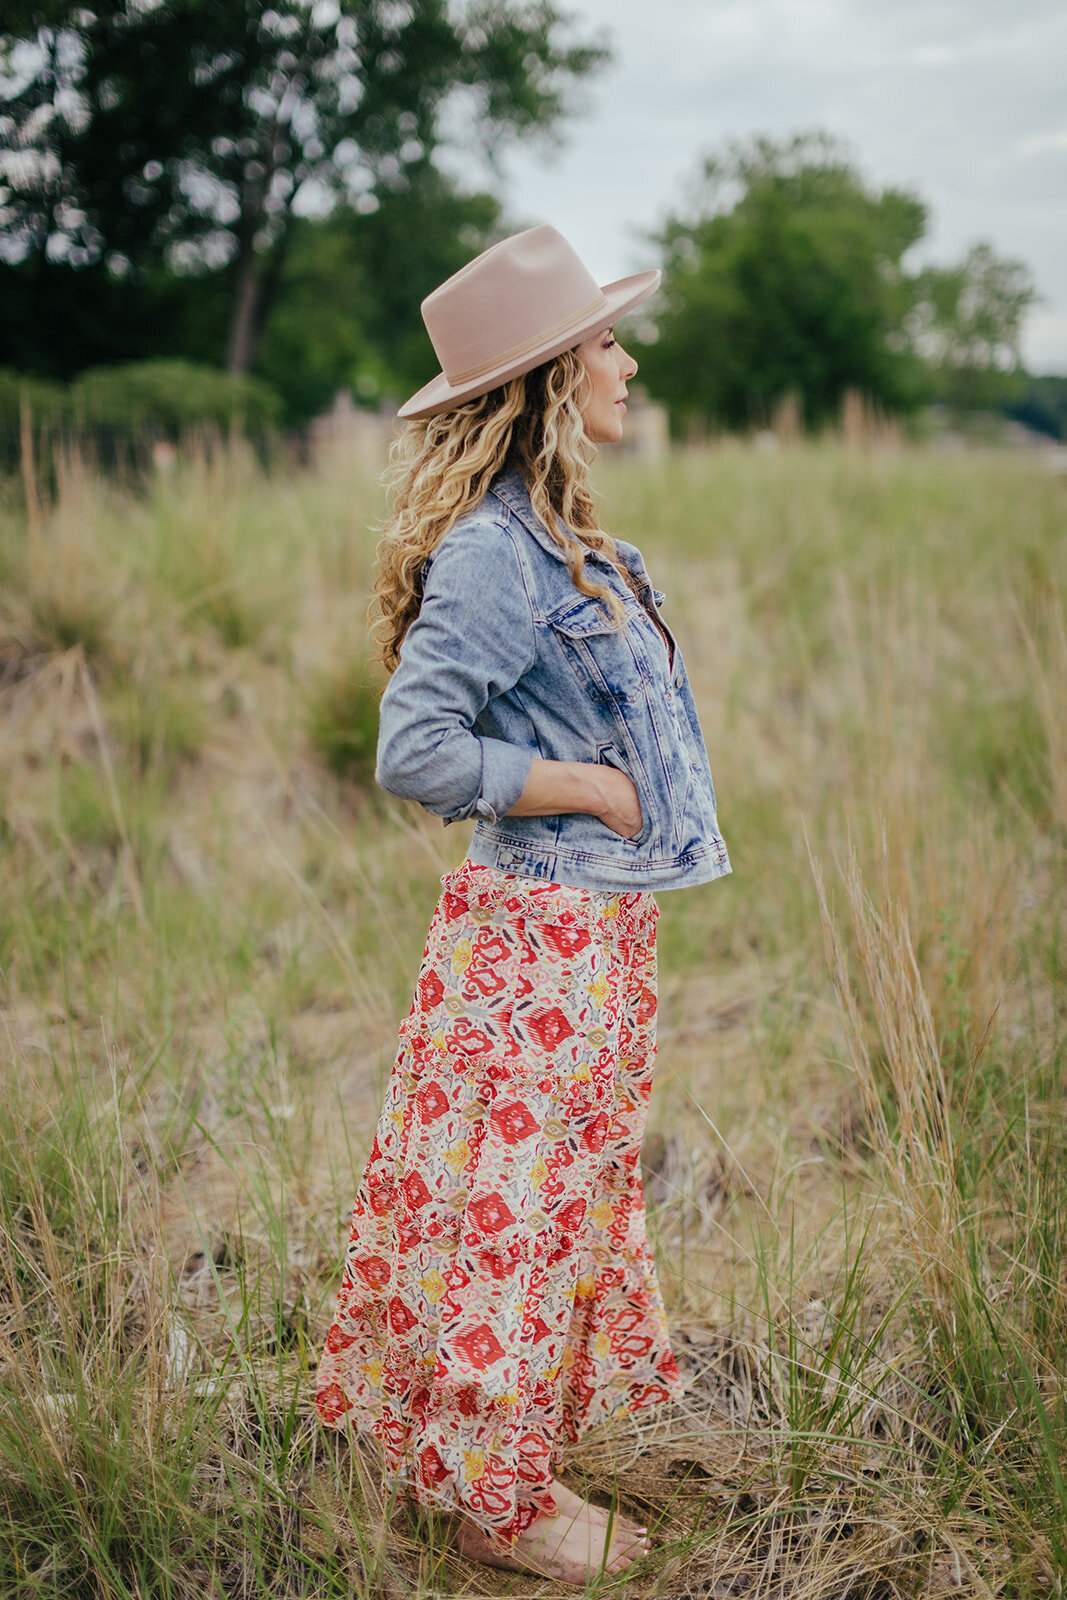 woman in tall grasses is wearing a red floral dress and jean jacket, and a fedora. She is in profile looking into the distance as the breeze blows her dress and hair.